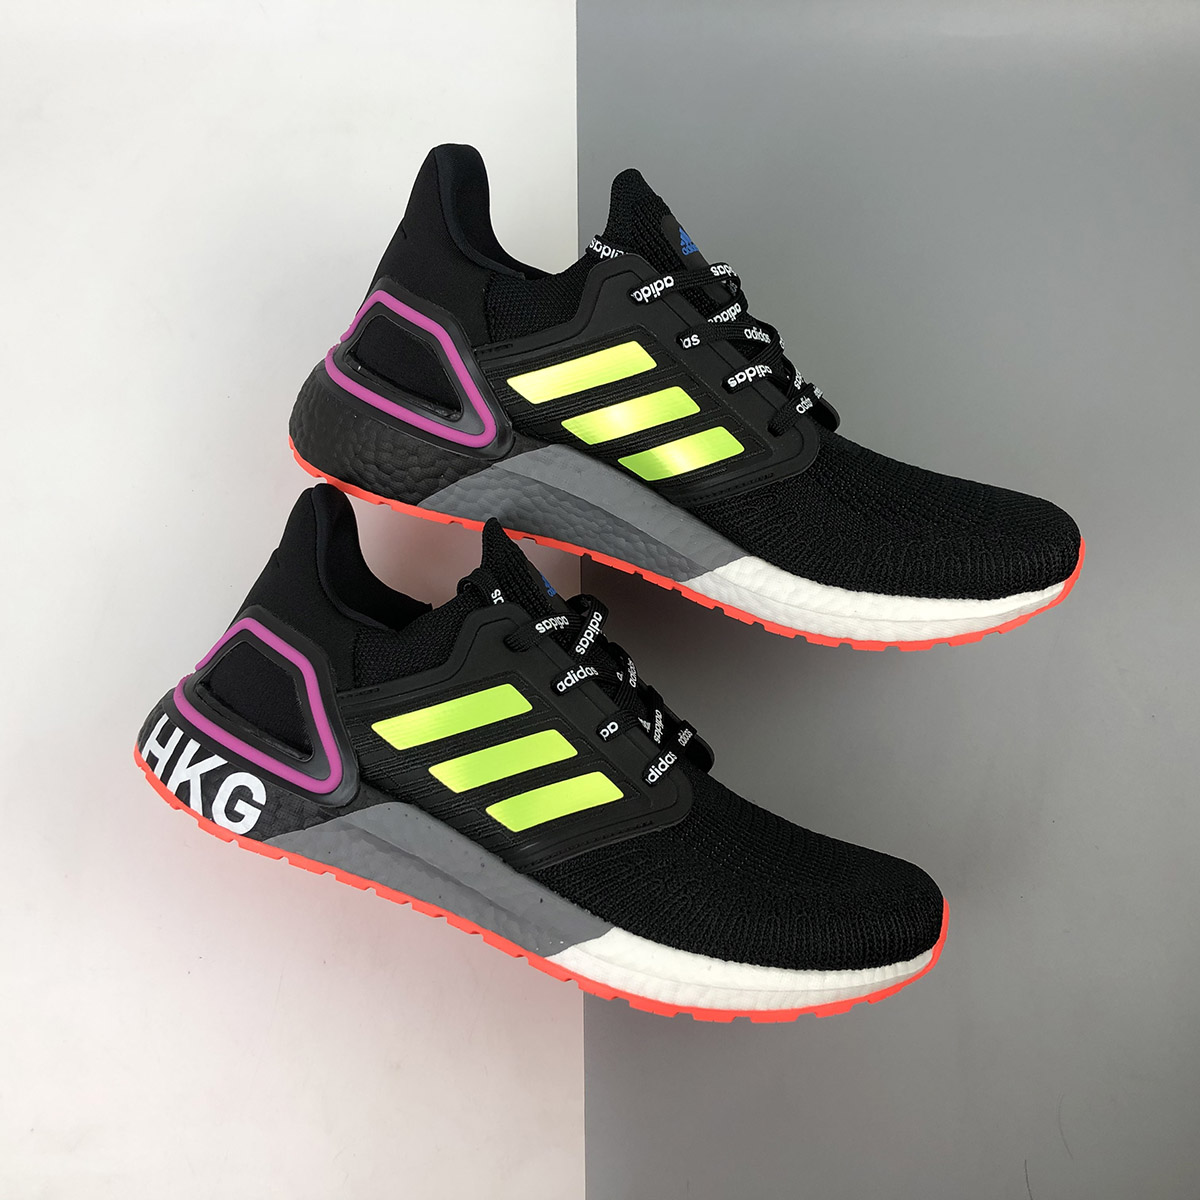 adidas Ultra Boost 20 ‘Hong Kong’ For Sale – The Sole Line